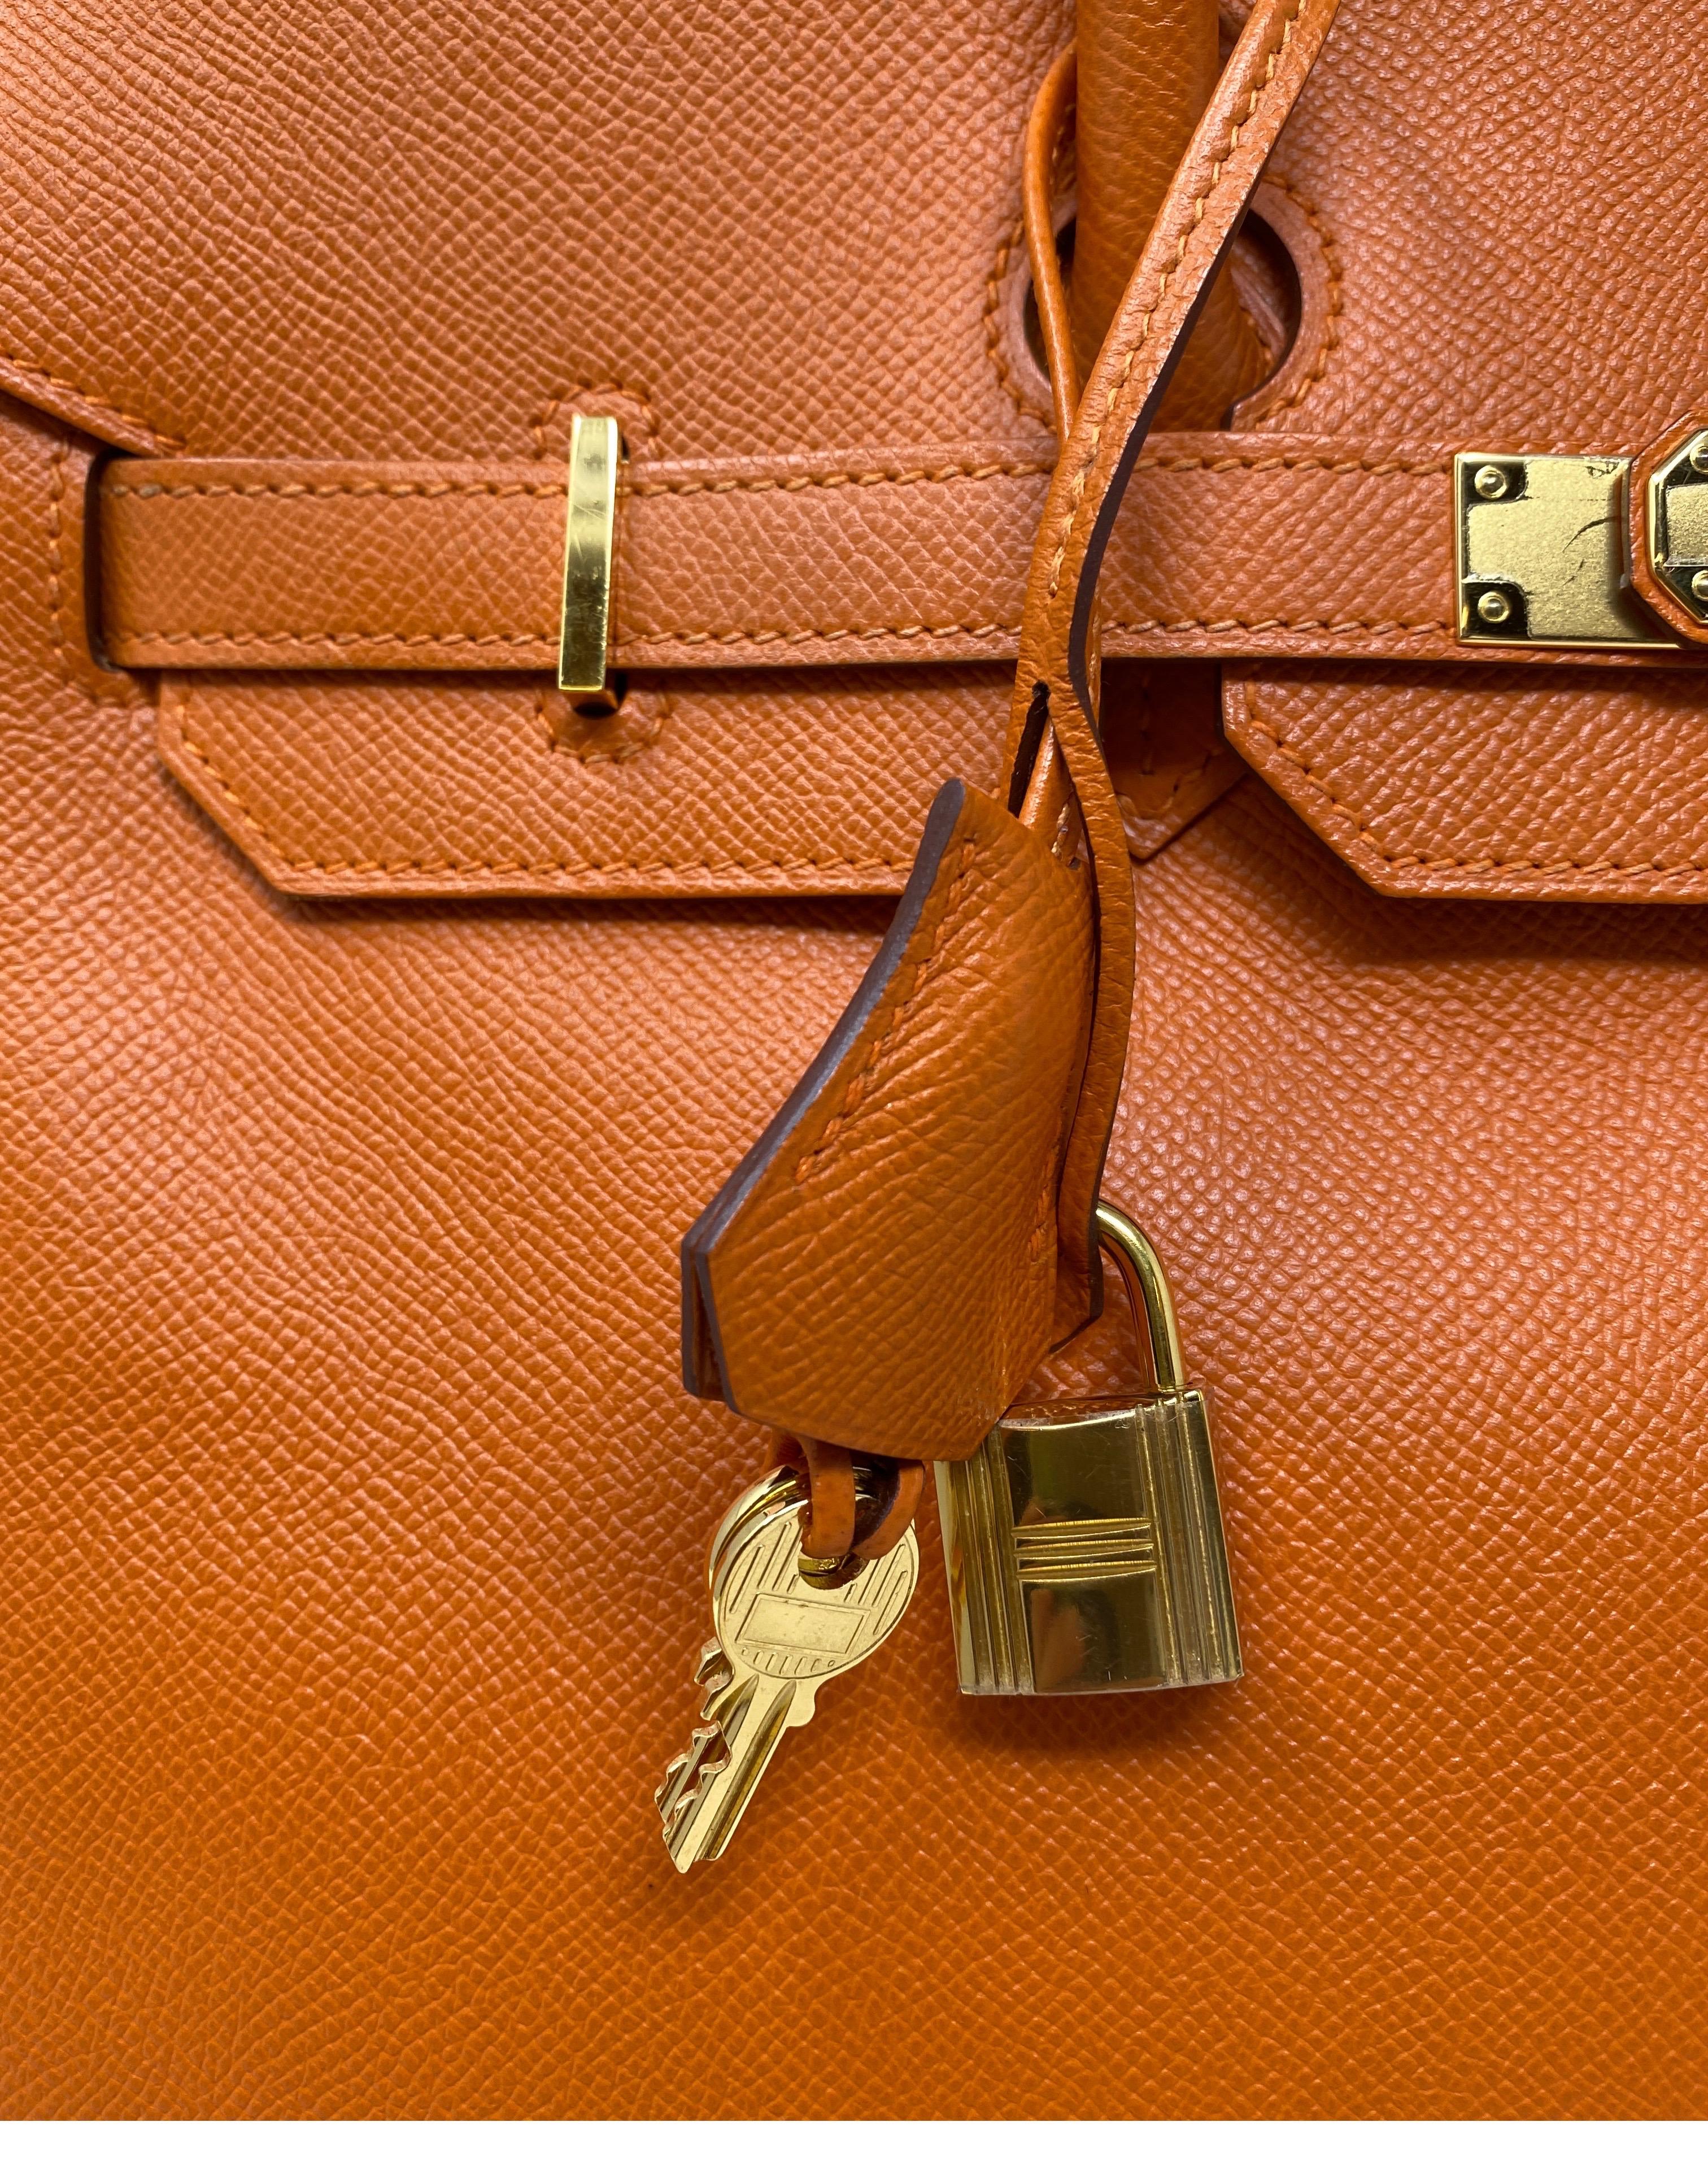 Hermes Orange Birkin 35 Bag. Epsom leather. Gold hardware. Excellent condition. Beautiful most wanted leather. Lighter epsom leather. Beautiful combination. Classic investment bag. Includes clochette, lock, keys, and dust cover. Guaranteed